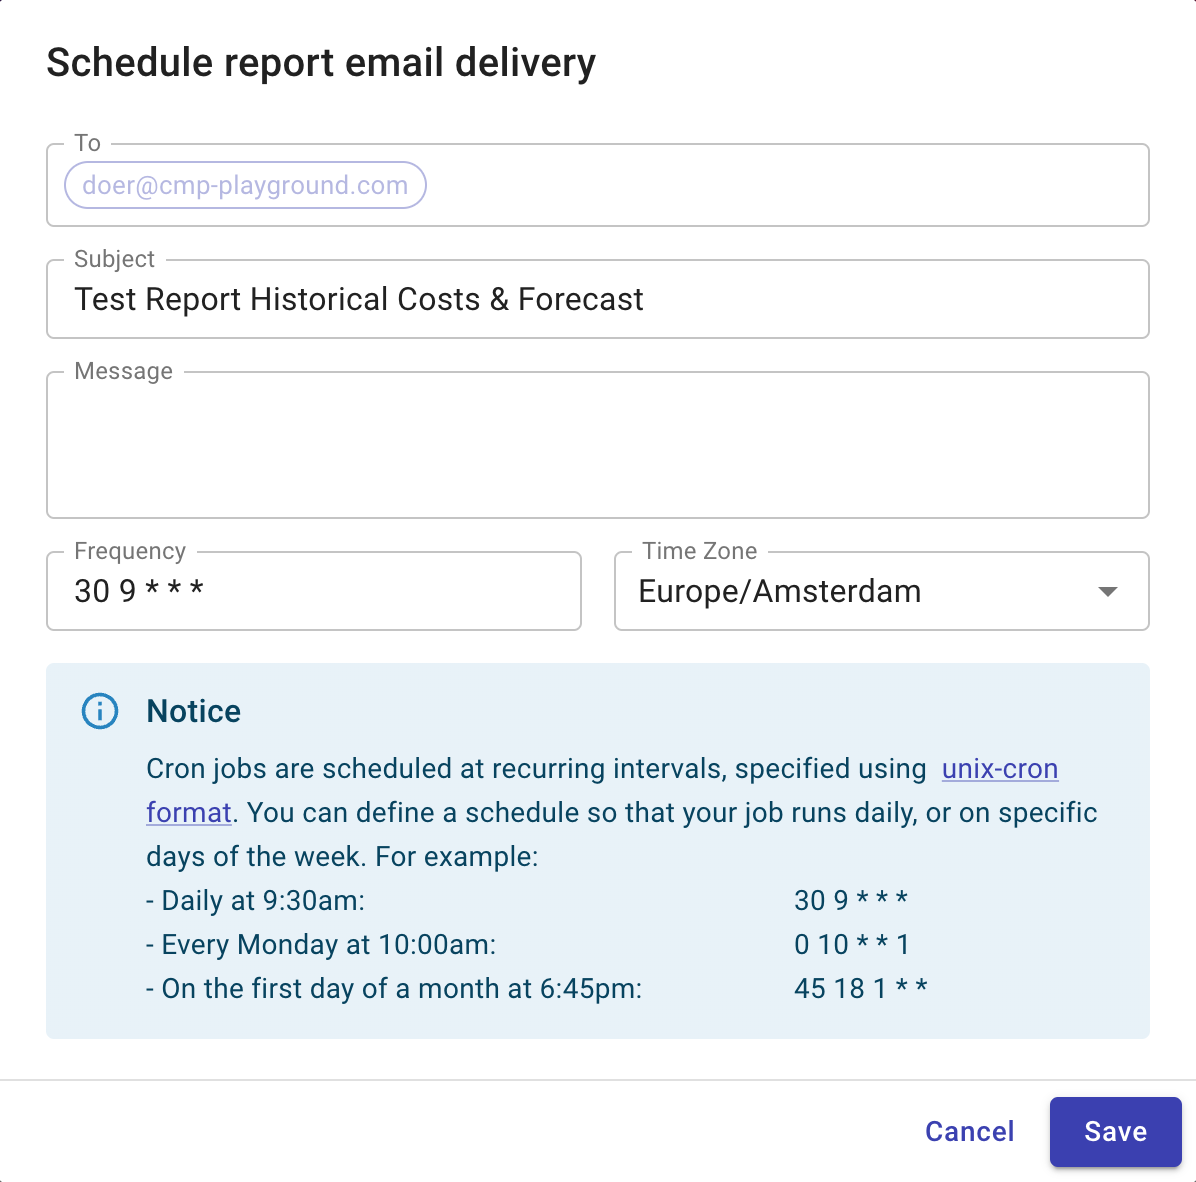 The Schedule Report Email Delivery dialog